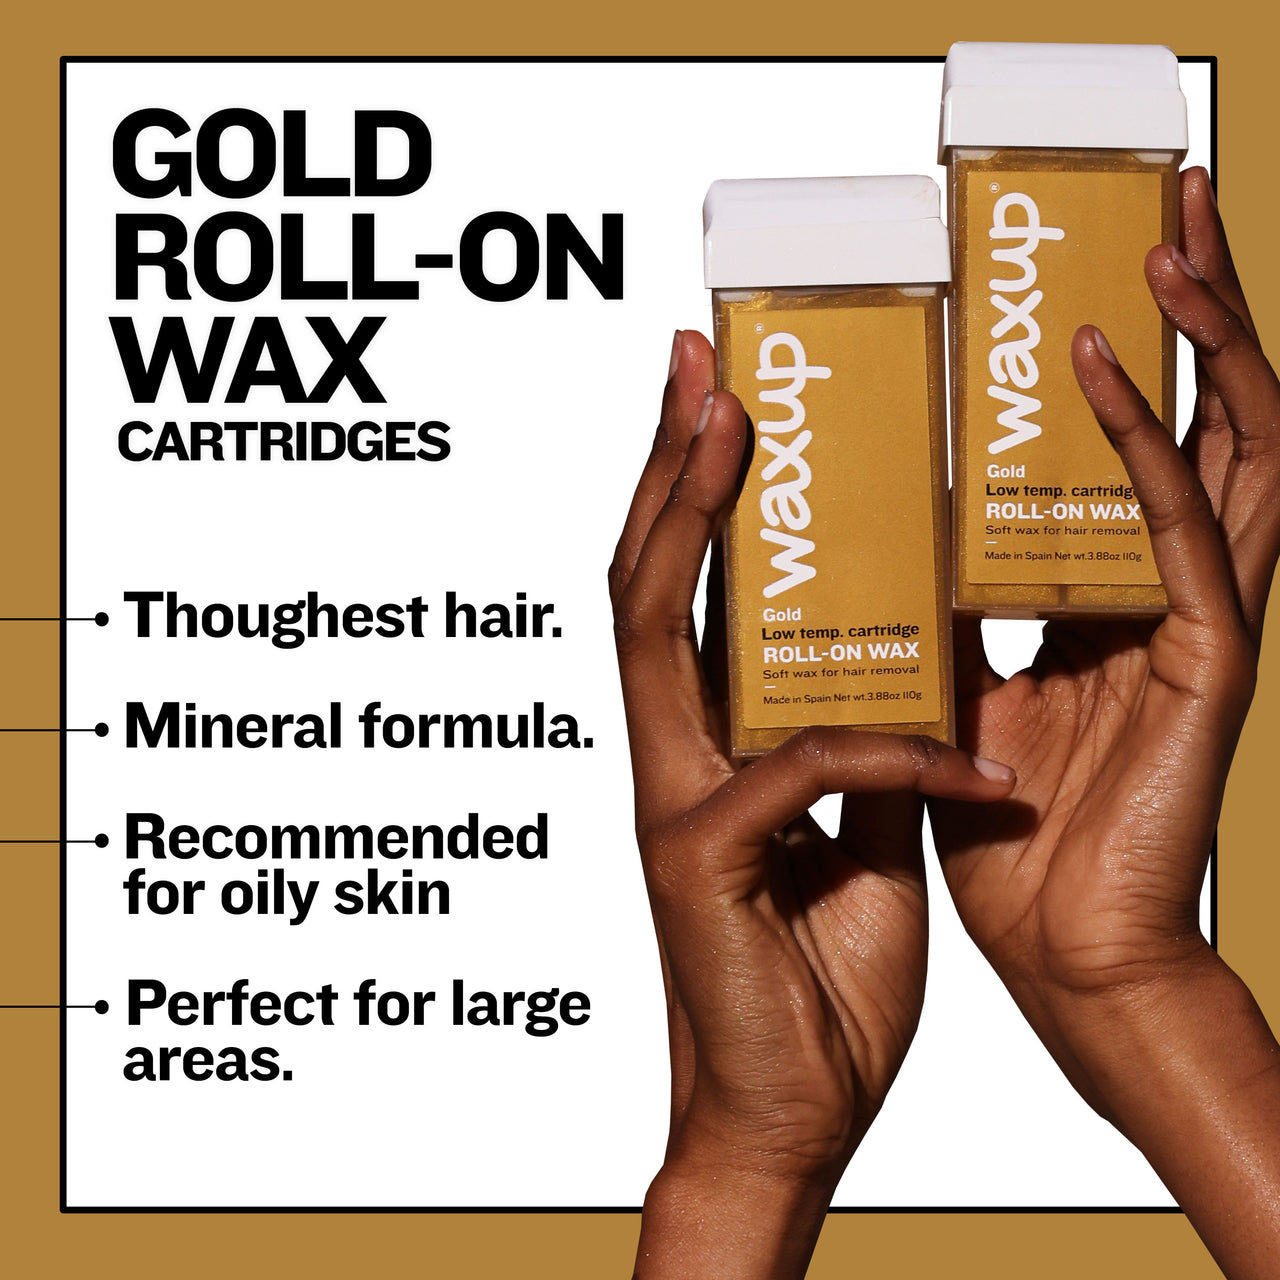 Elite Gold Roll On Wax Cartridges Case of 50 - thatswaxup -  - Roll On Wax - waxup hair removal wax body waxing kit women and men professional waxing supplies